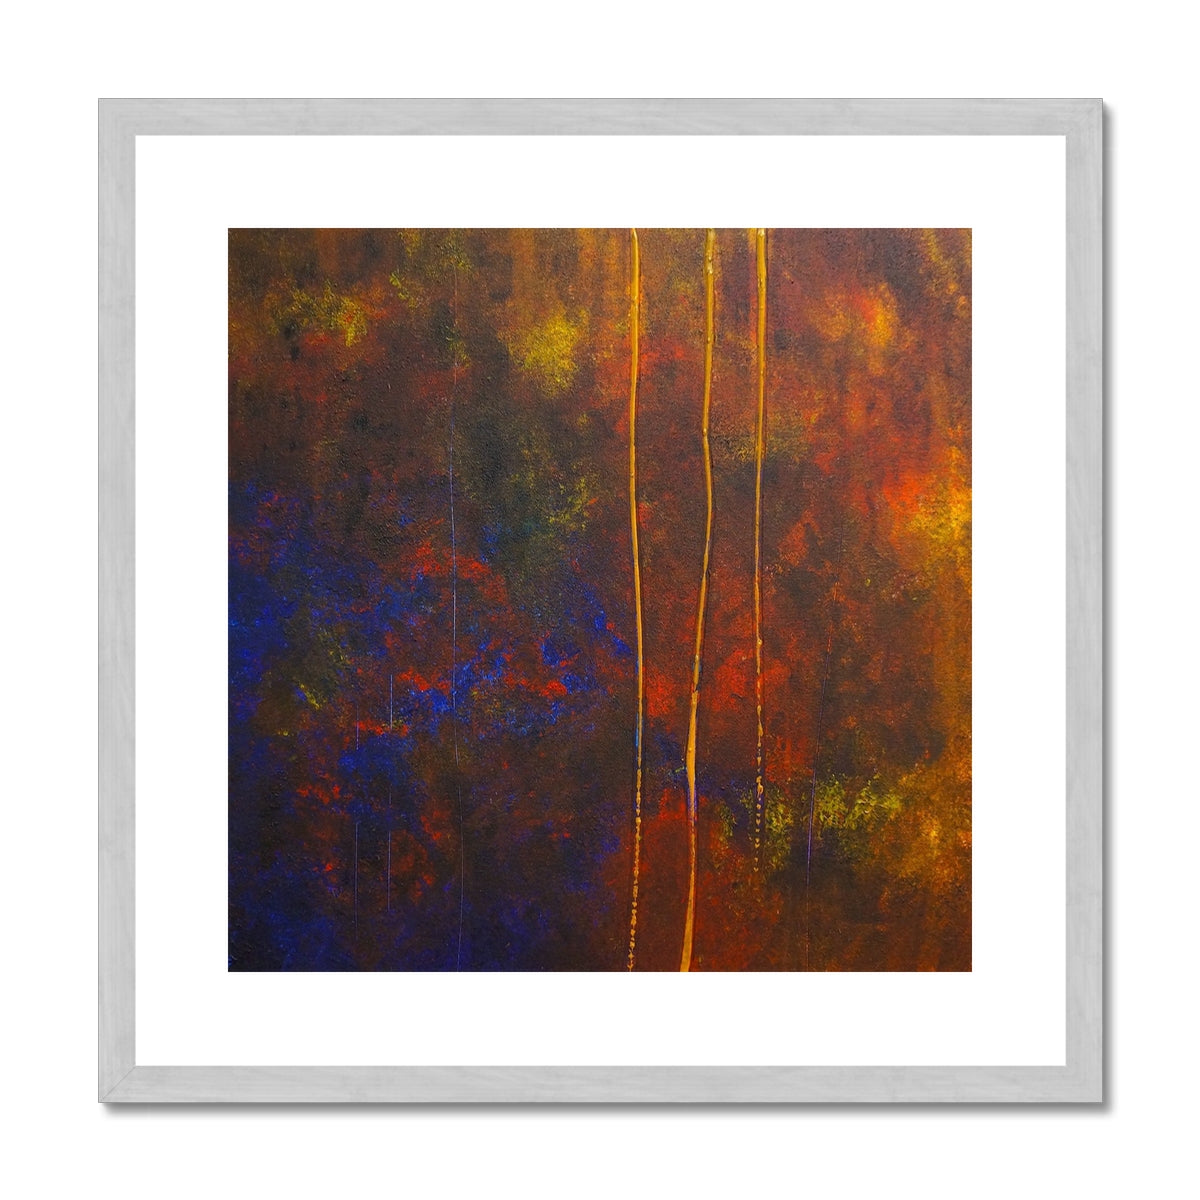 The Autumn Wood Abstract Painting | Antique Framed & Mounted Prints From Scotland-Antique Framed & Mounted Prints-Abstract & Impressionistic Art Gallery-20"x20"-Silver Frame-Paintings, Prints, Homeware, Art Gifts From Scotland By Scottish Artist Kevin Hunter